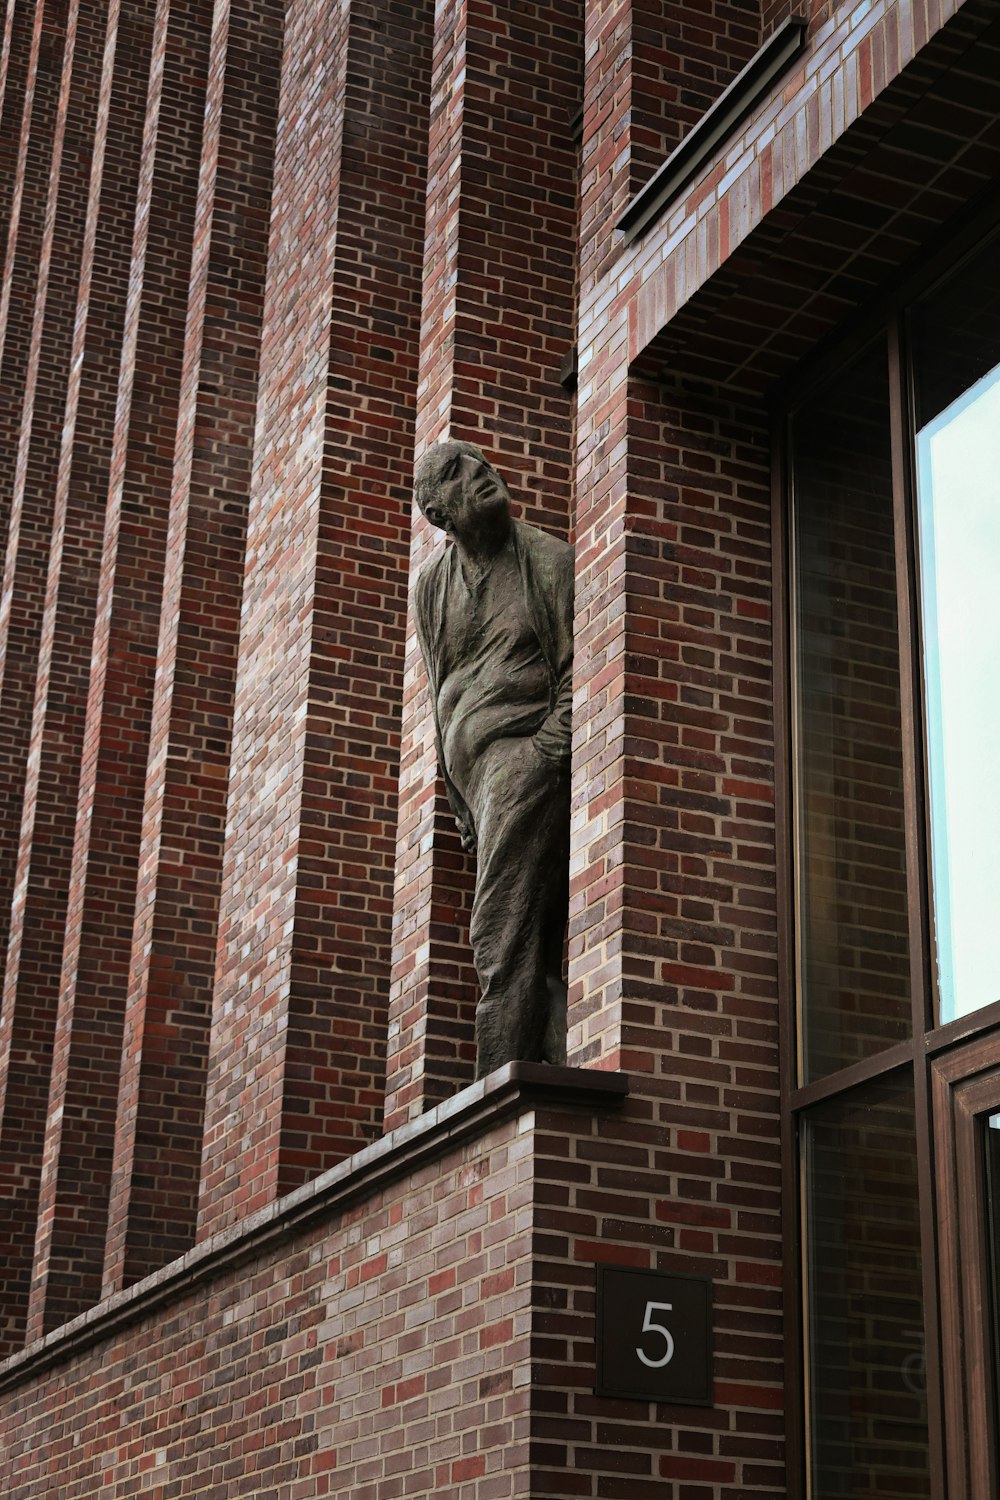 a statue of a person on a brick building